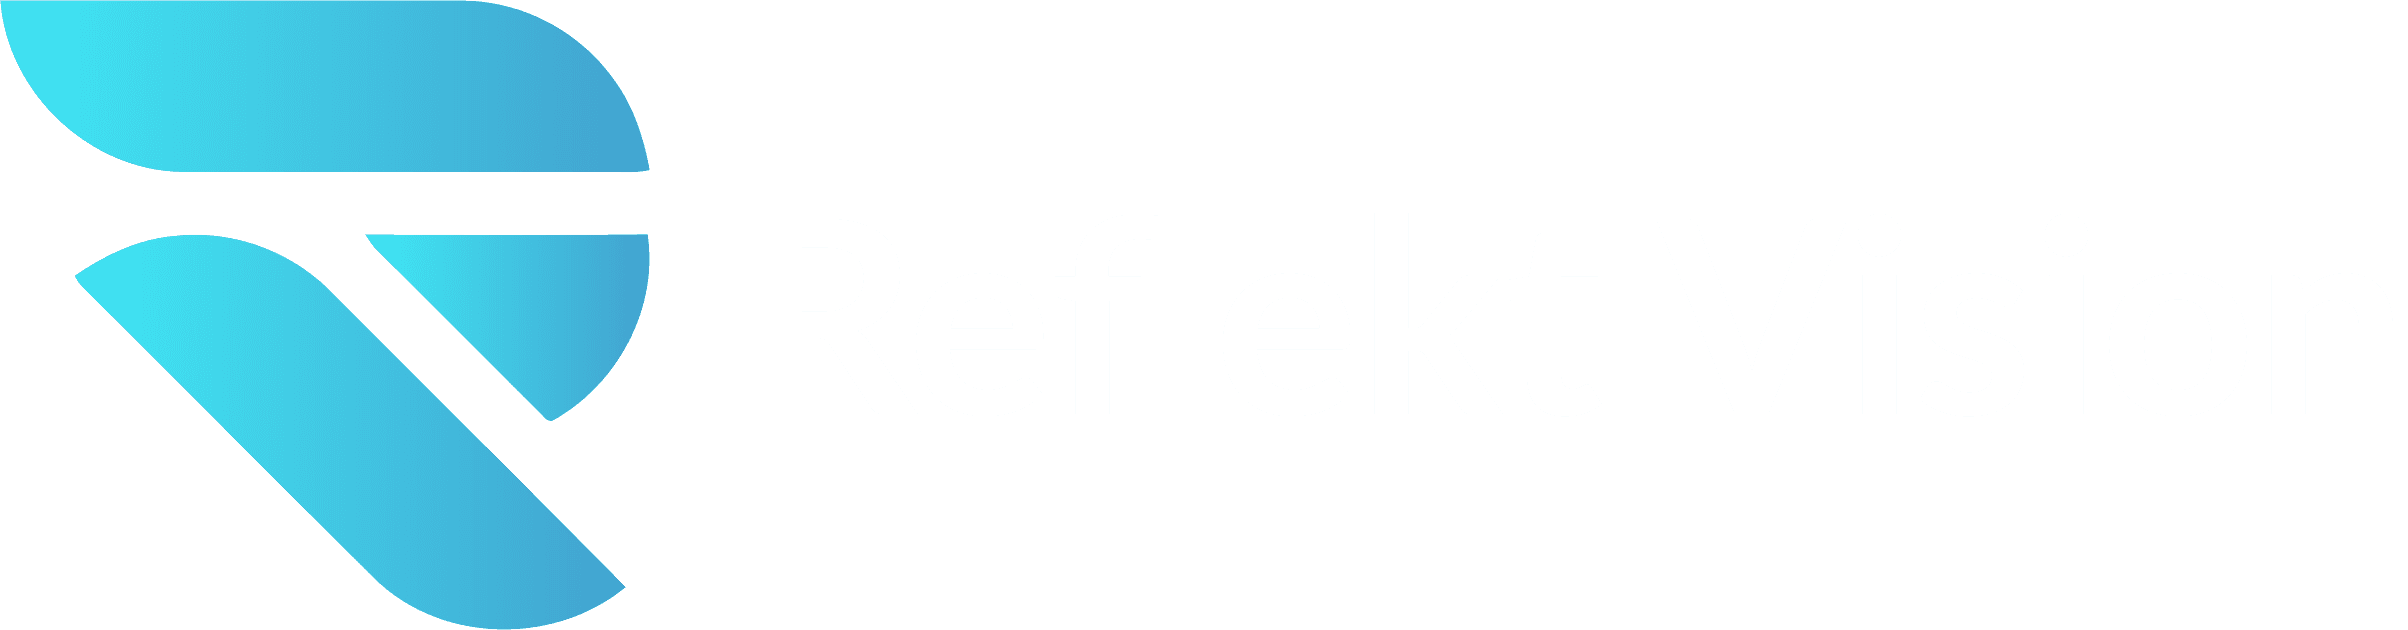 Achieving Digital Success with Reflekt Vision